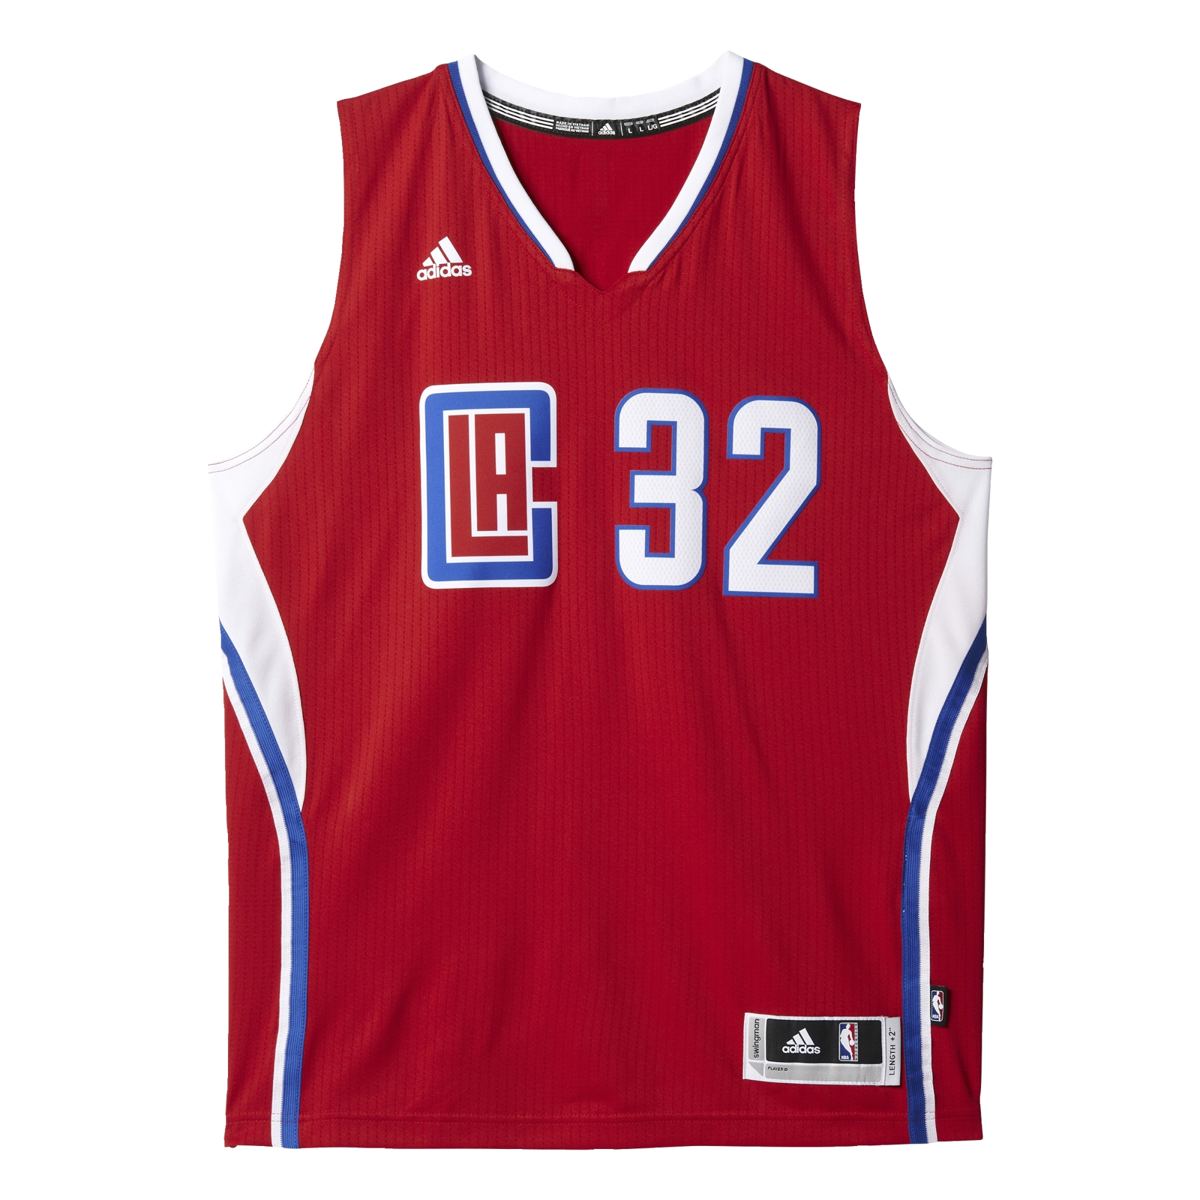 L.A. CLIPPERS / ADIDAS SWINGMAN / GRIFFIN - NEW w TAGS - XXL Length +2  Jersey